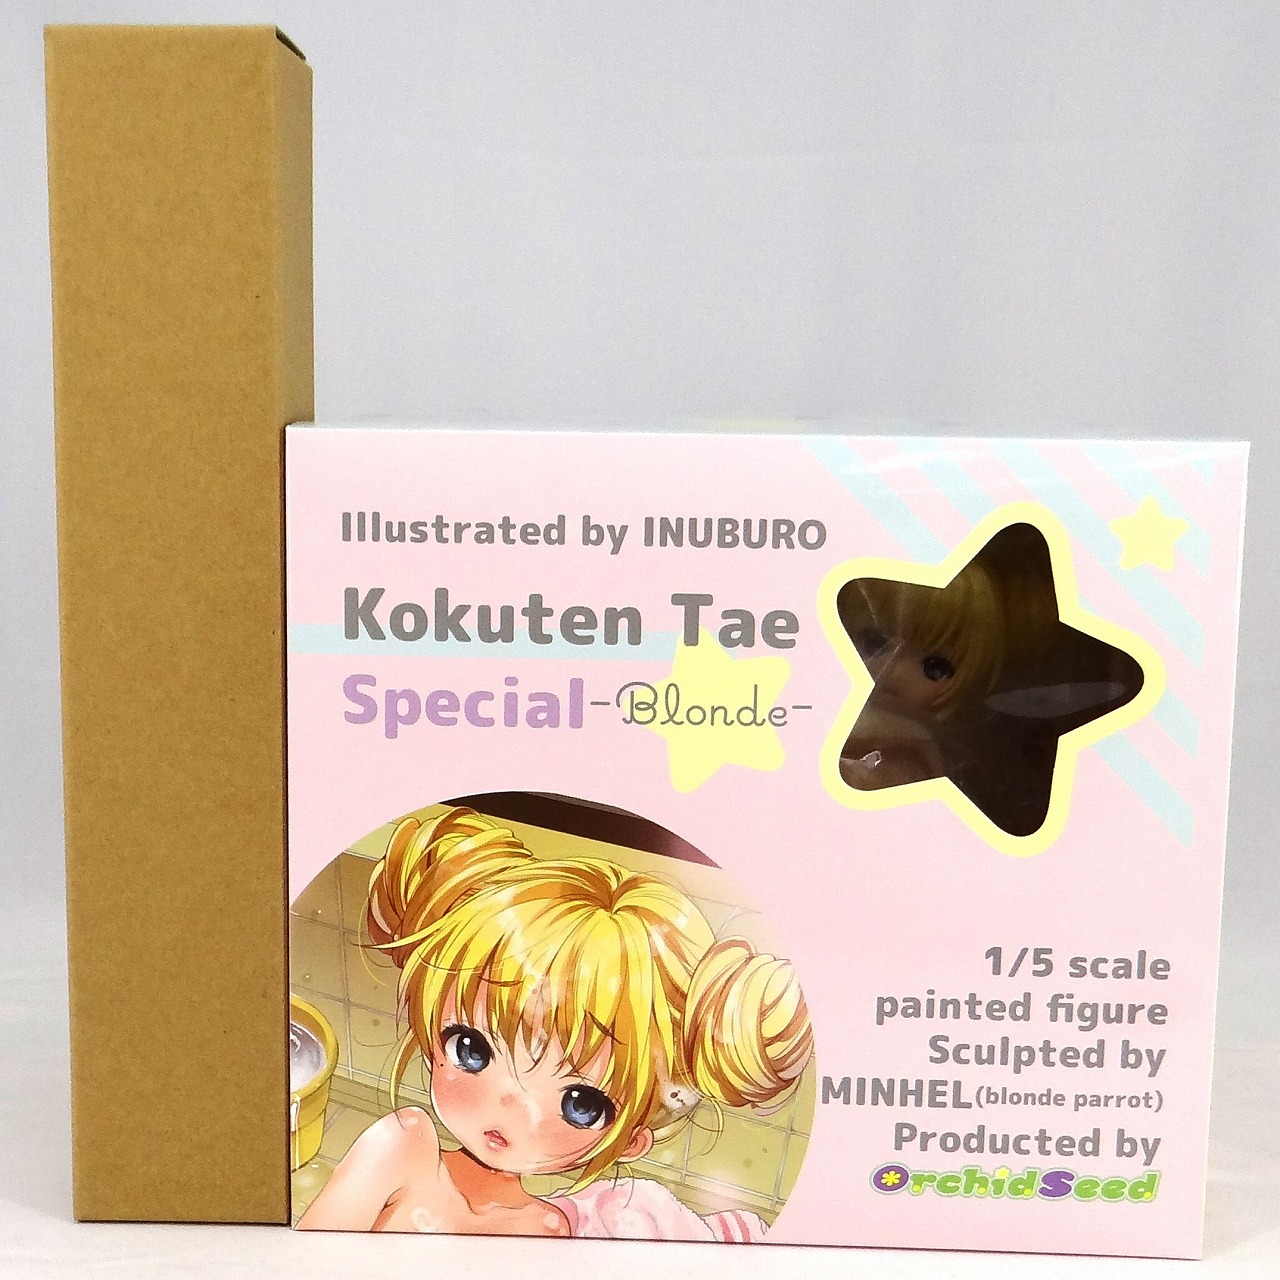 Orchid Seed Comic Aun illustrated by Inuburo "Kokuten Tae" Special -Blonde- 1/5 PVC figure with bonus poster